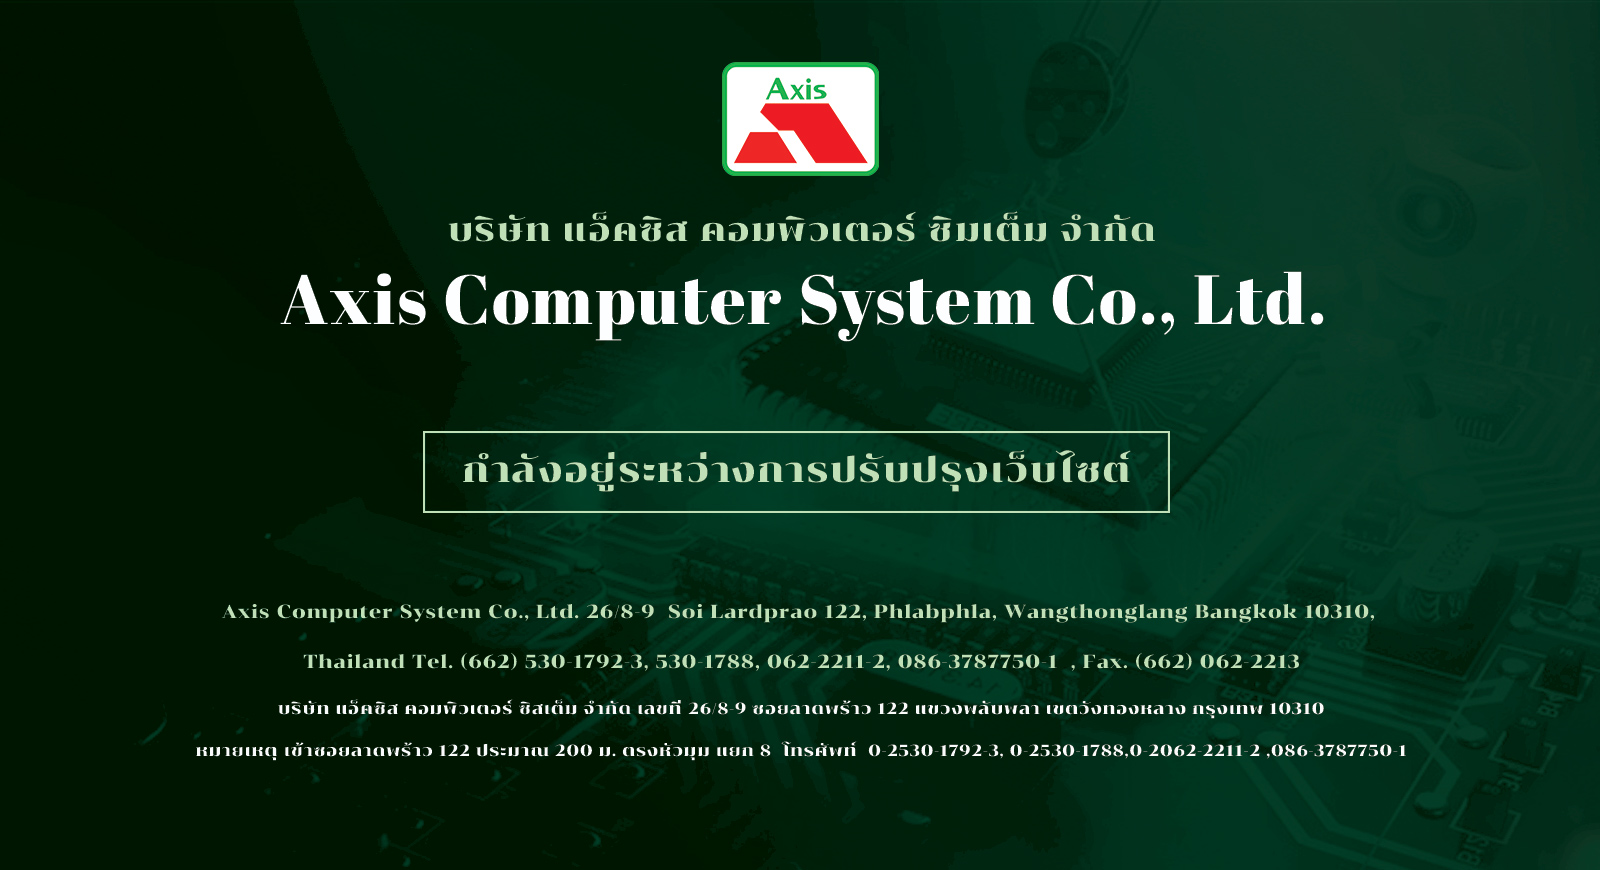 Axis Computer System Co., Ltd.